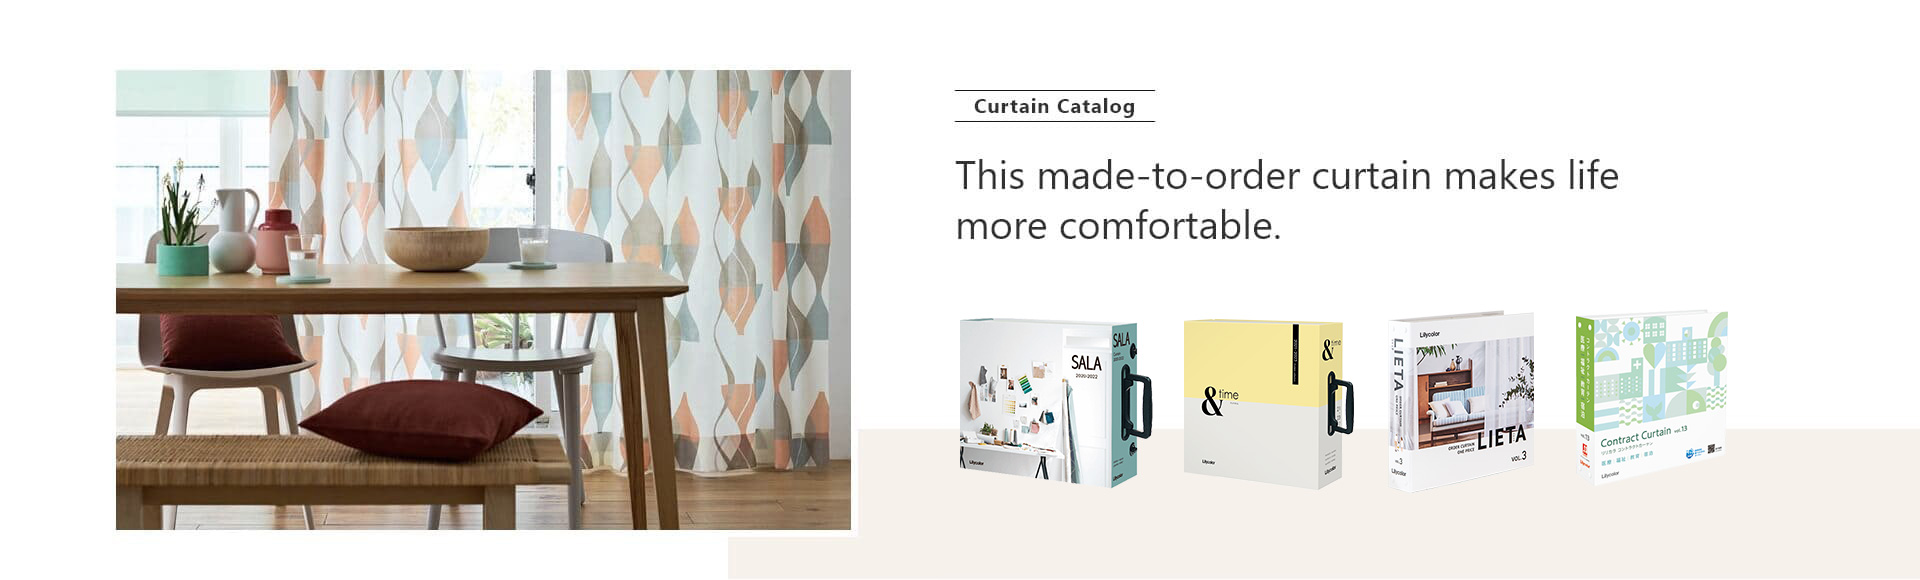 Curtain Catalog: This made-to-order curtain makes life more comfortable.